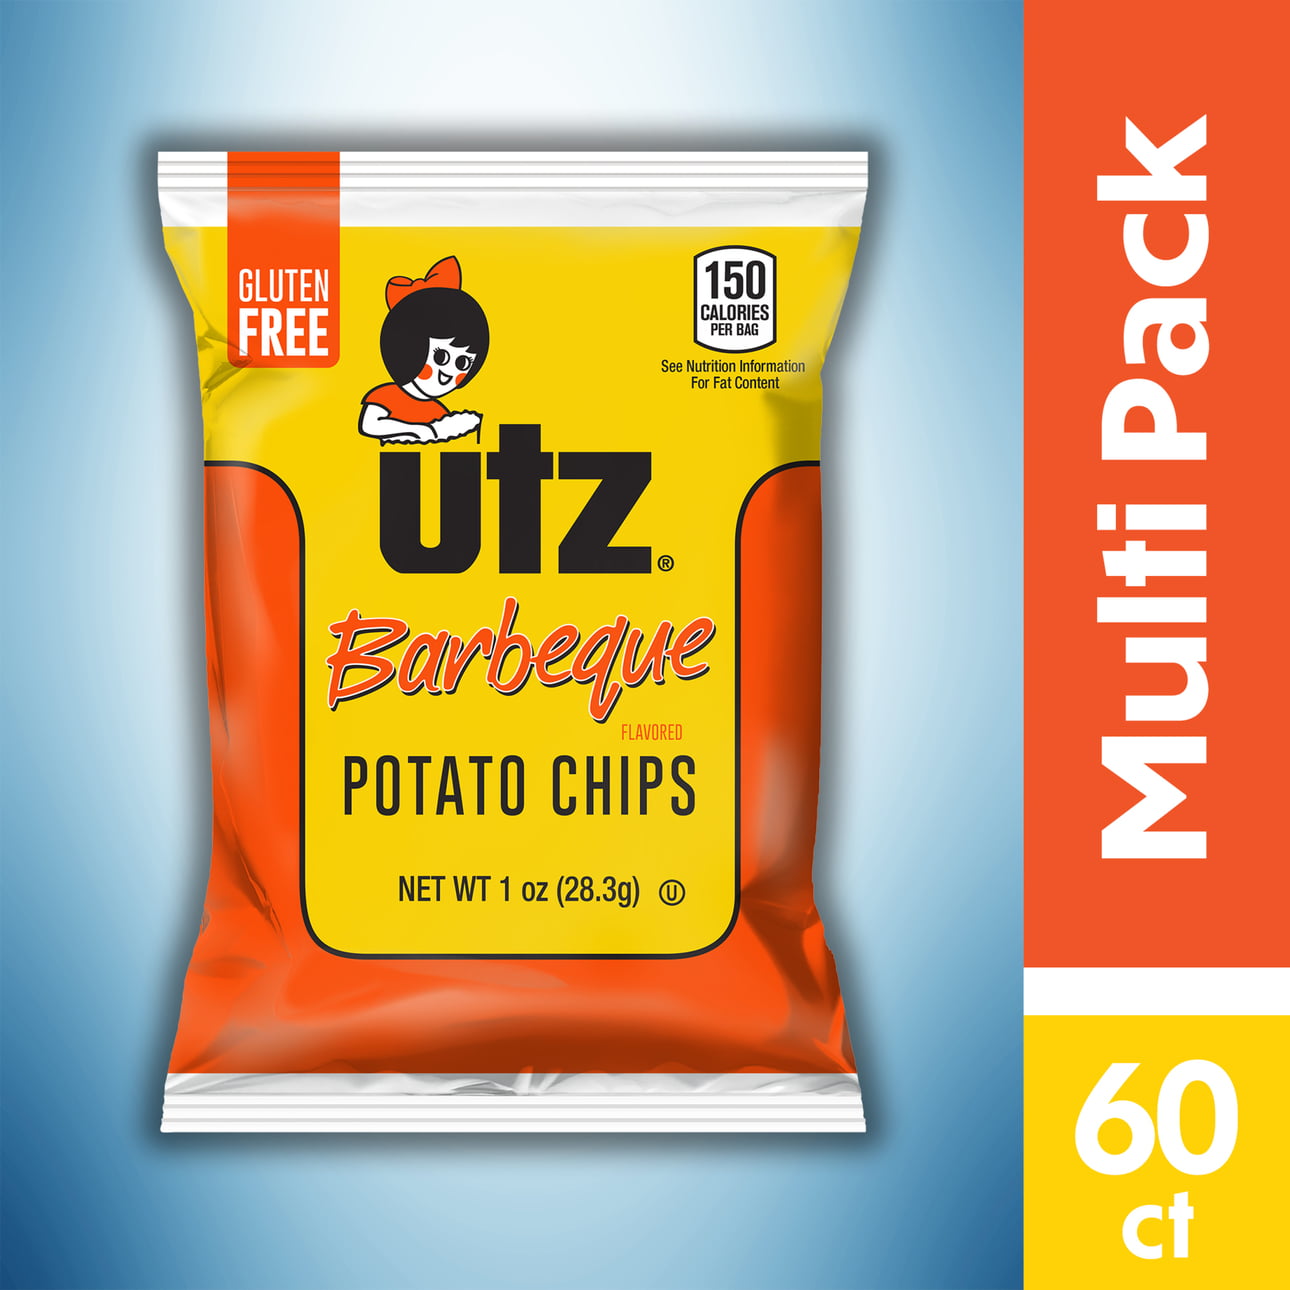 UTZ Barbecue Potato Chips-Pack of 60 1 oz. Bags-$16.38 at Amazon & Walmart